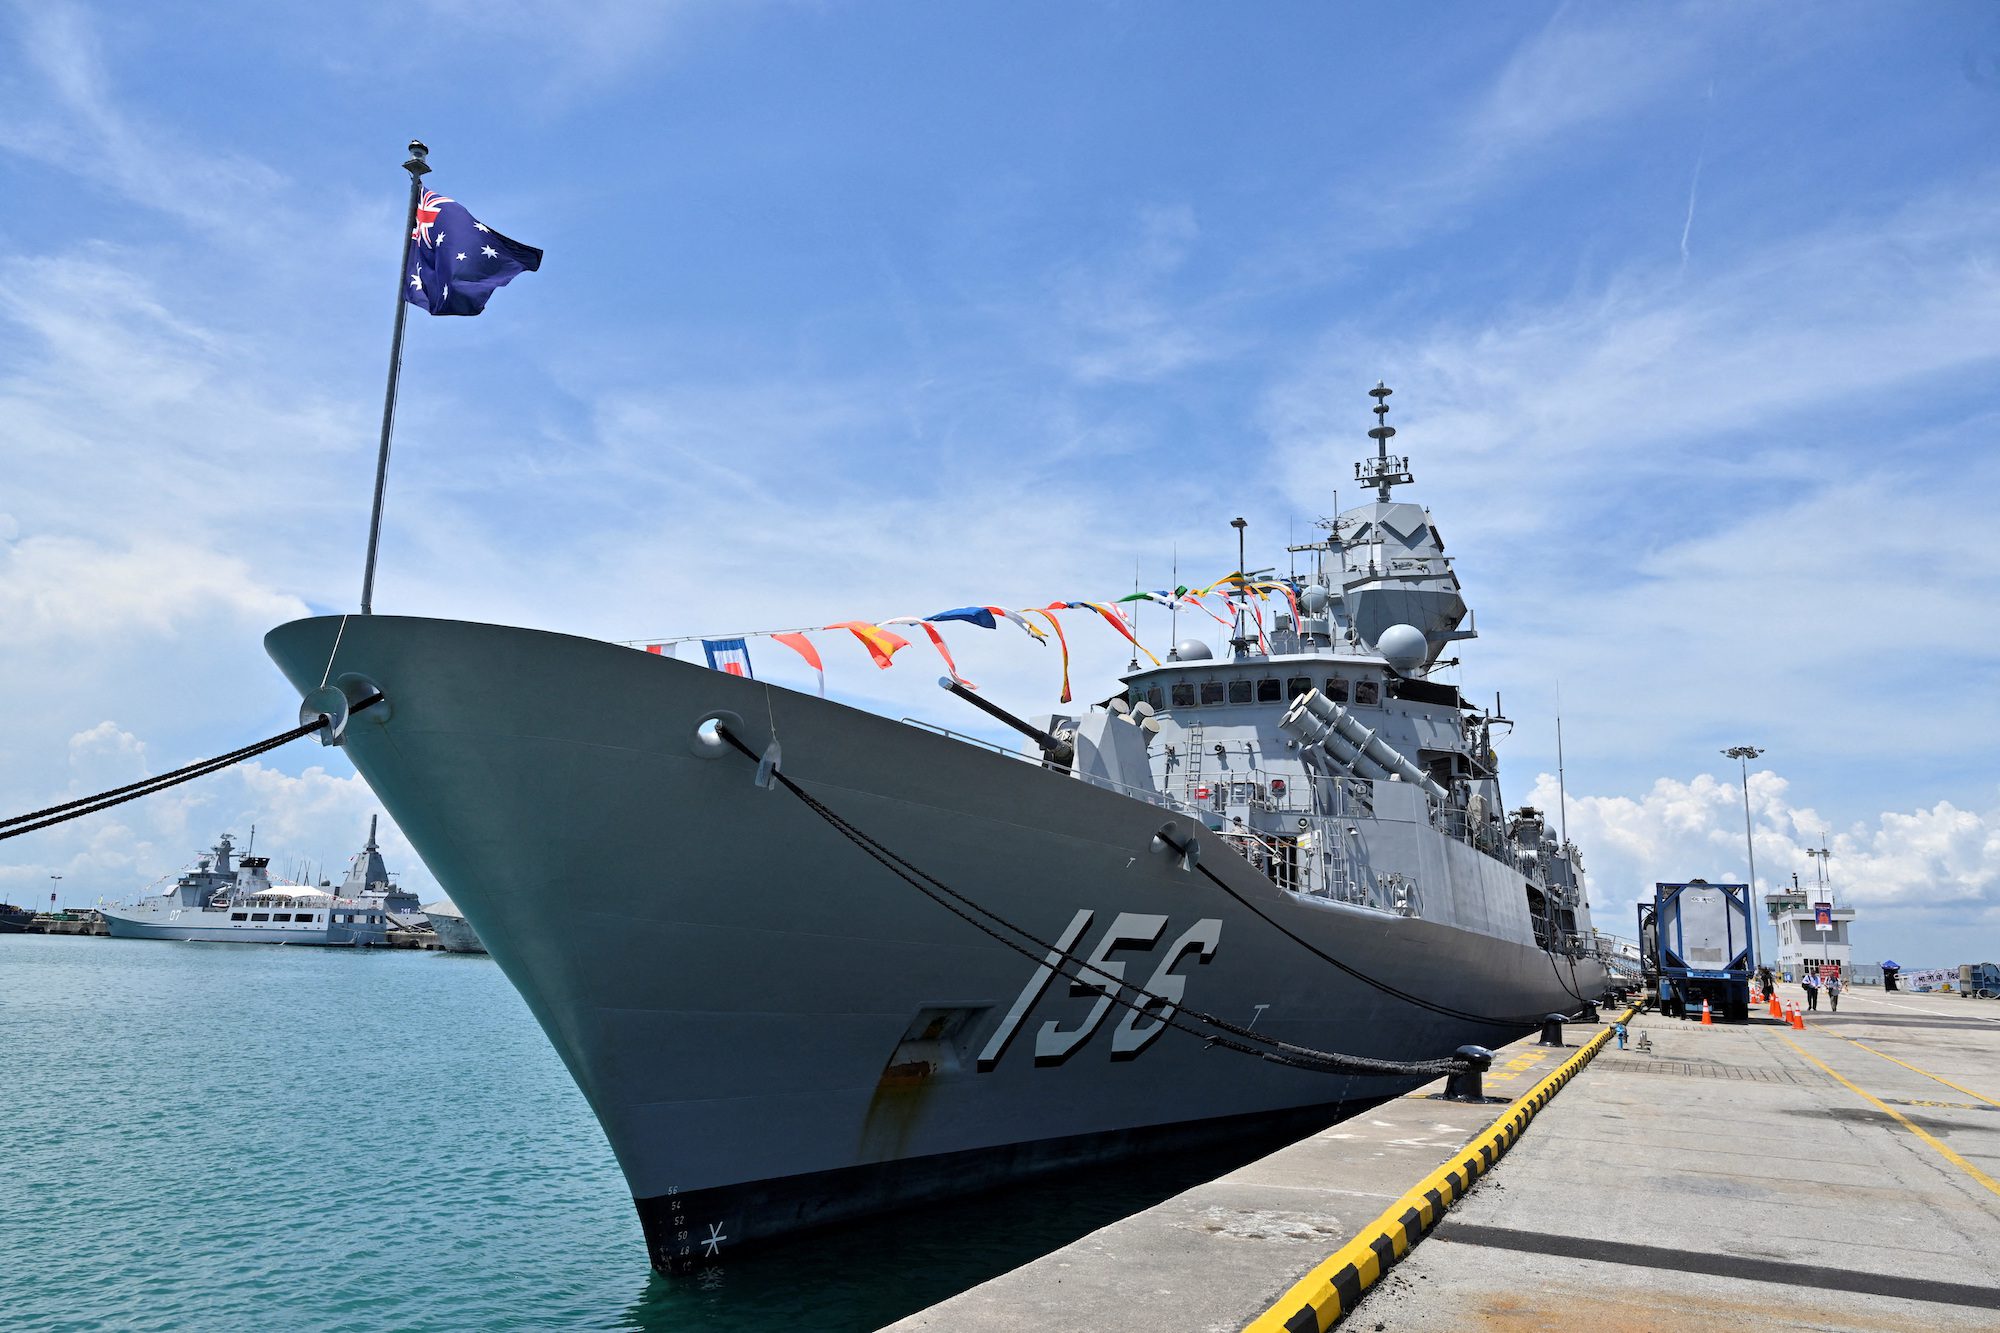 FILE PHOTO: Royal Australian Navy vessel, HMAS Toowoomba, is docked at Changi Naval Base at the display of warships during IMDEX Asia 2023, a maritime defence exhibition in Singapore May 4, 2023. REUTERS/Caroline Chia/File Photo